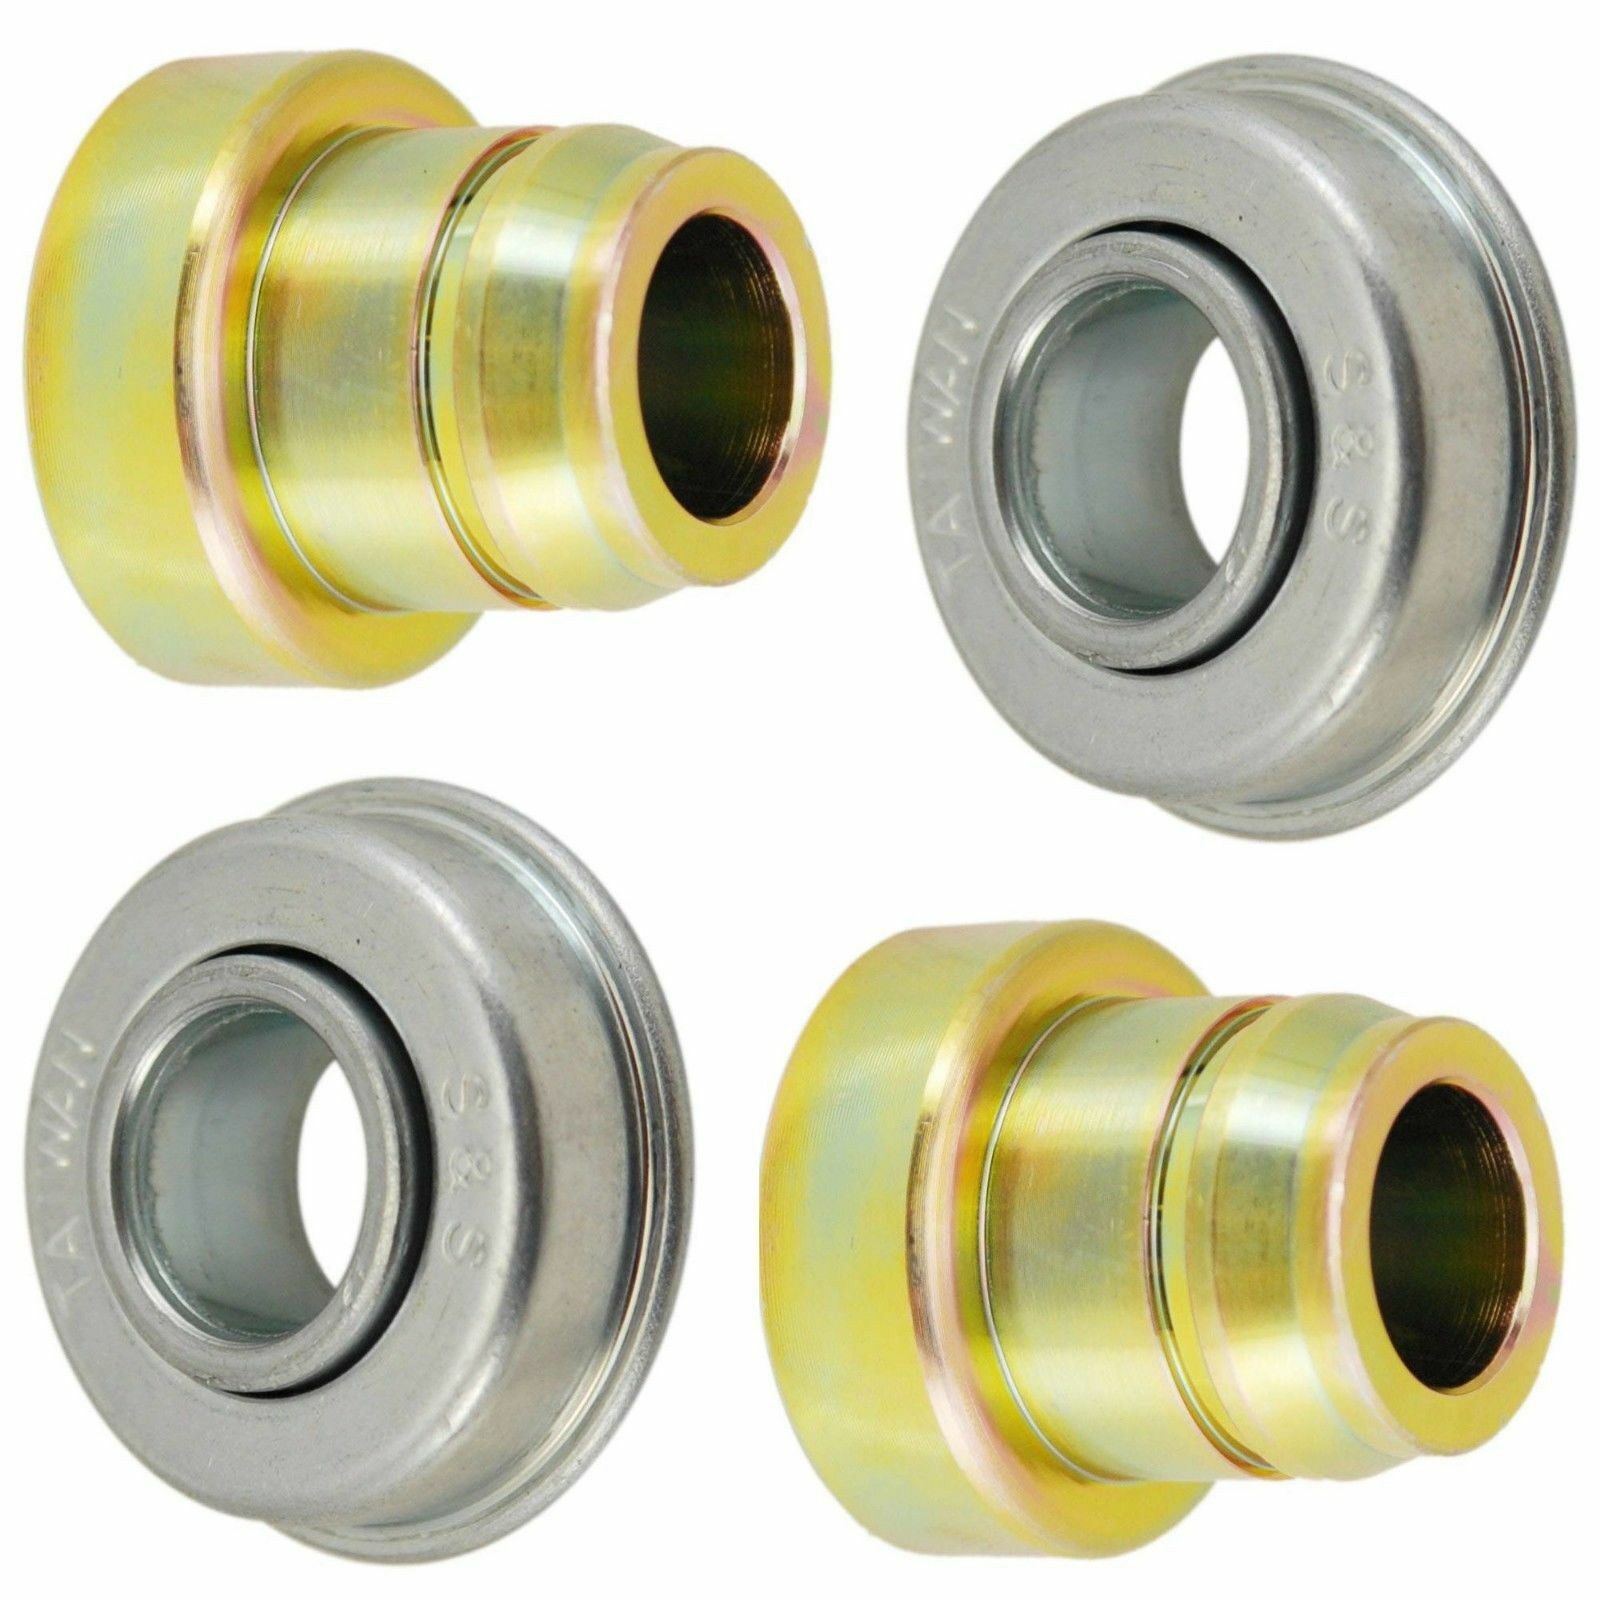 Genuine Toro Bearing Kit For Toro Lawn Mowers Contains Qty (2) 104-8699 Ball Bearing, Qty (2) 104-8698 Retainer